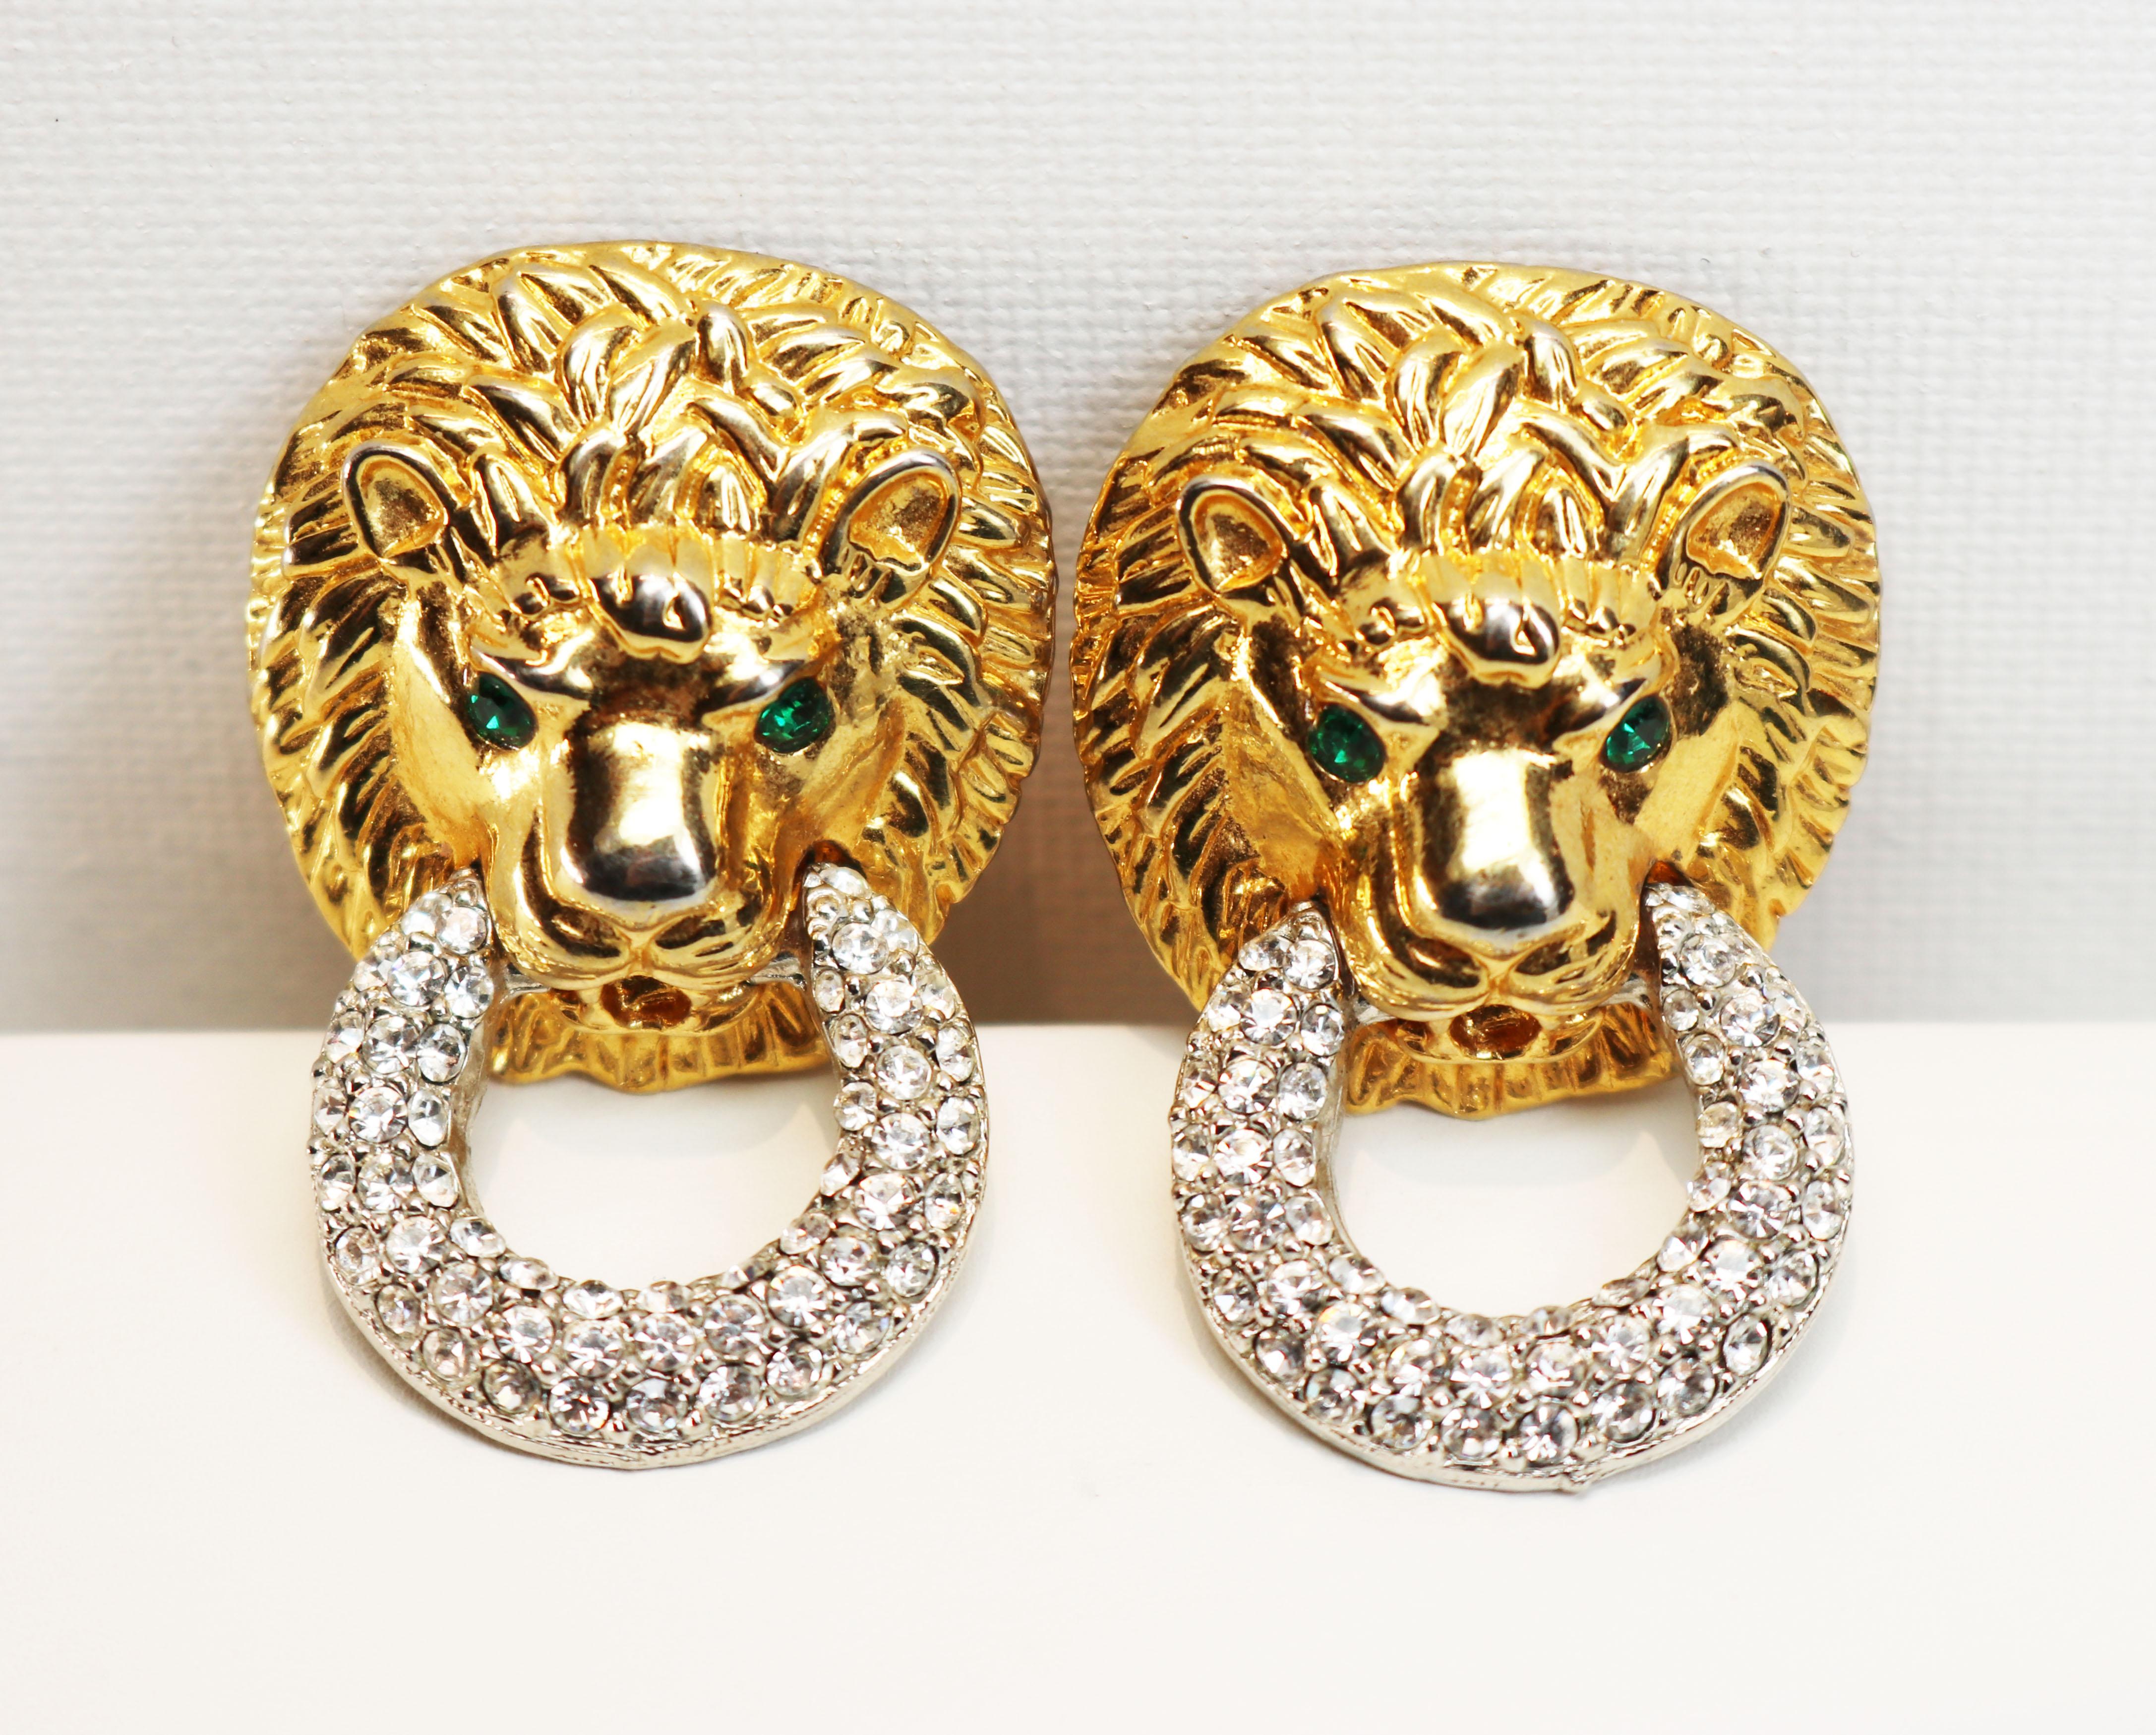 Kenneth Jay Lane Crystal Encrusted Lions Head Earrings In Good Condition For Sale In Mastic Beach, NY